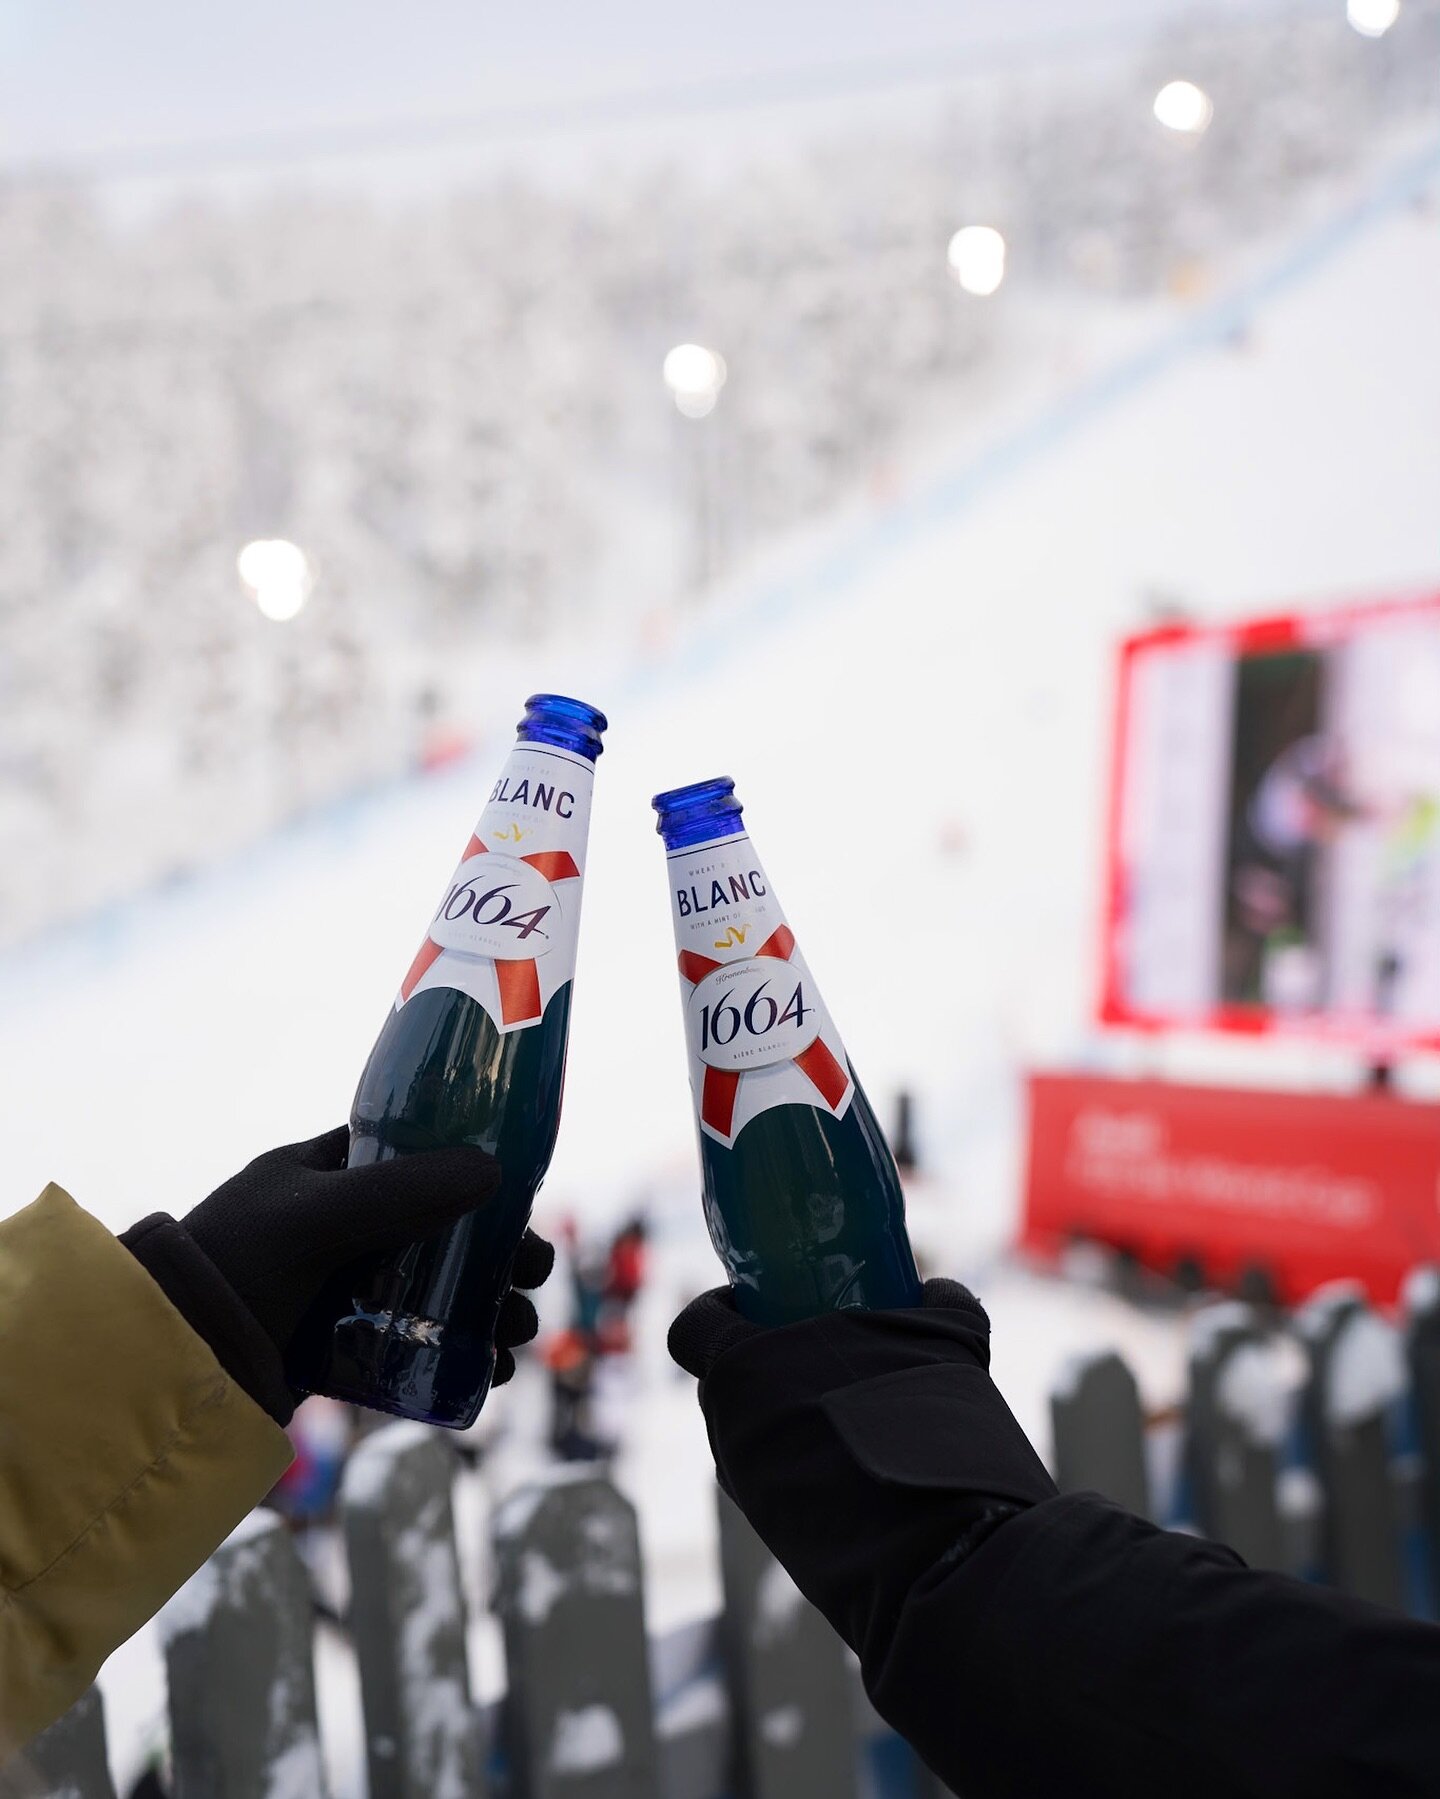 Cheers to an amazing first day of World Cup Levi! ❄️ Are you ready for another round tomorrow? 😎

#worldcuplevi #welcometowinter #1664blanc